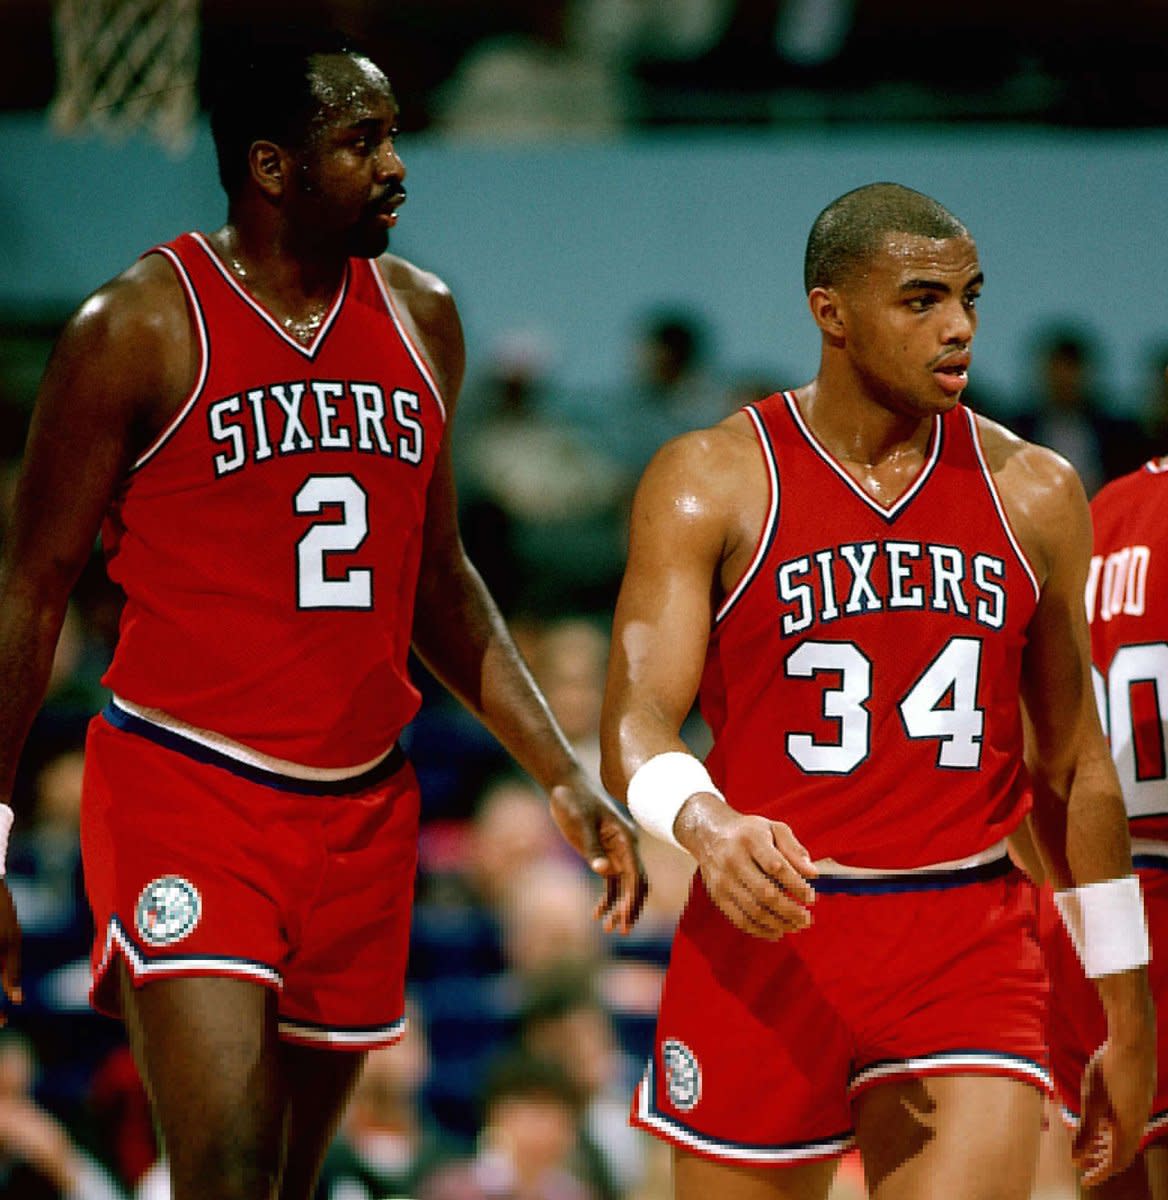 Charles Barkley Reveals How Moses Malone Helped And Motivated Him: "You're Fat And You're Lazy, You Weigh 300 Pounds..."